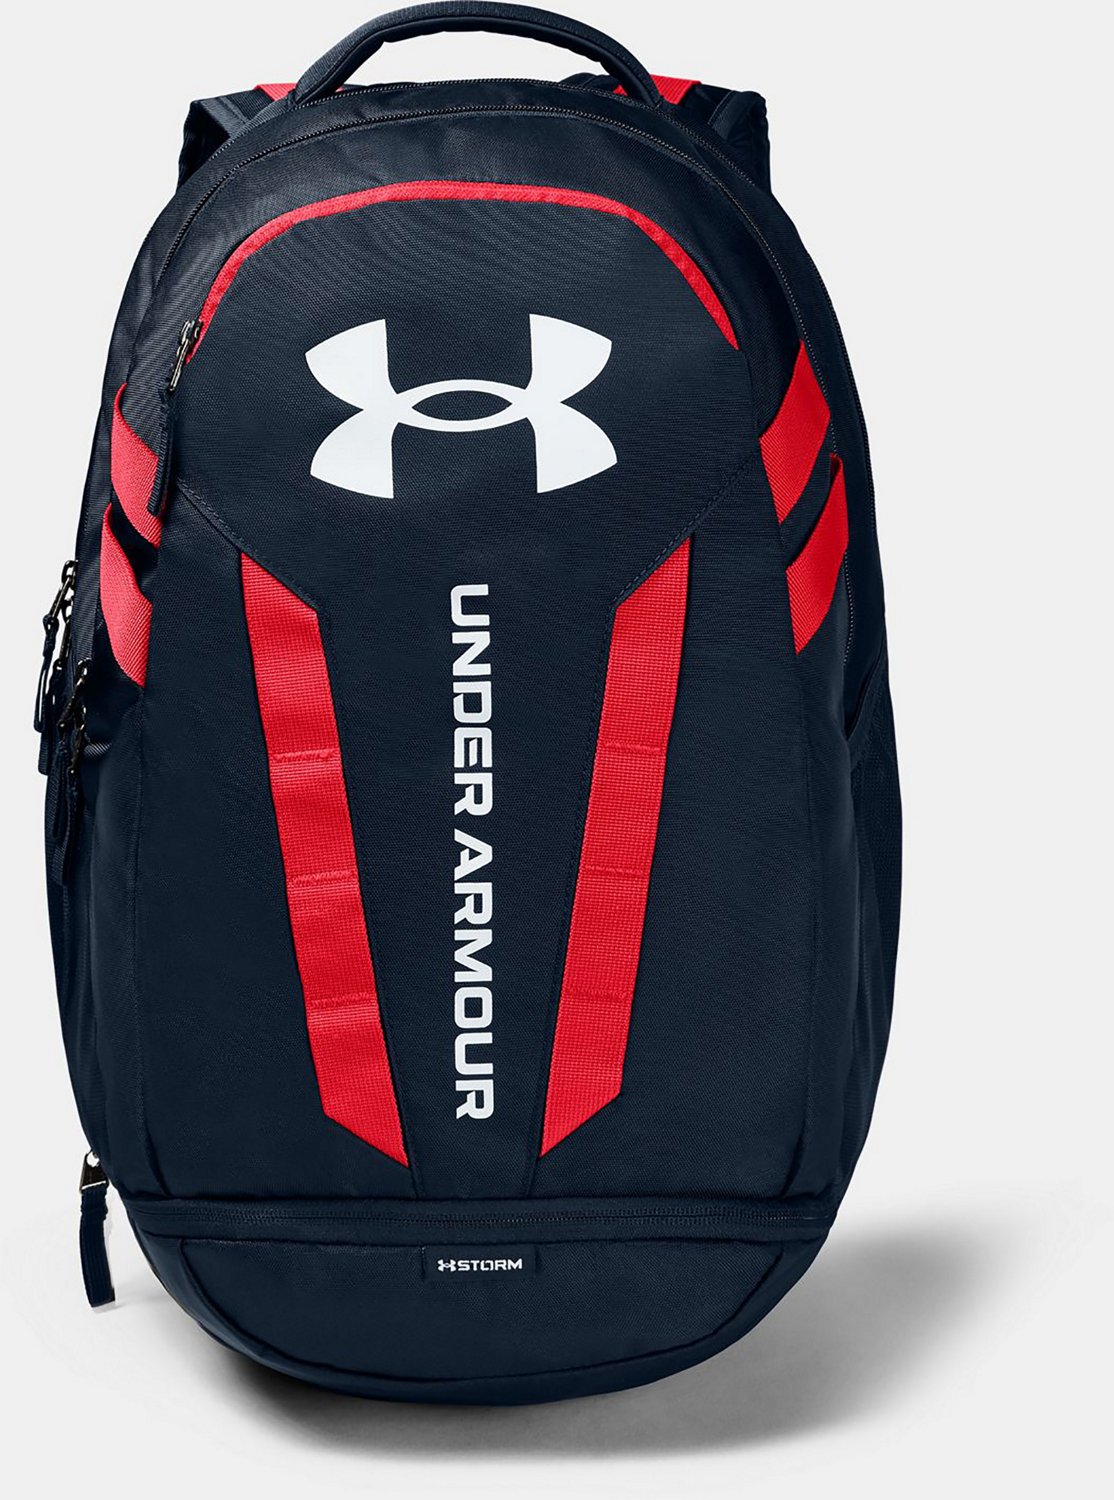 Under Armour Hustle II Backpack, Royal, One Size 